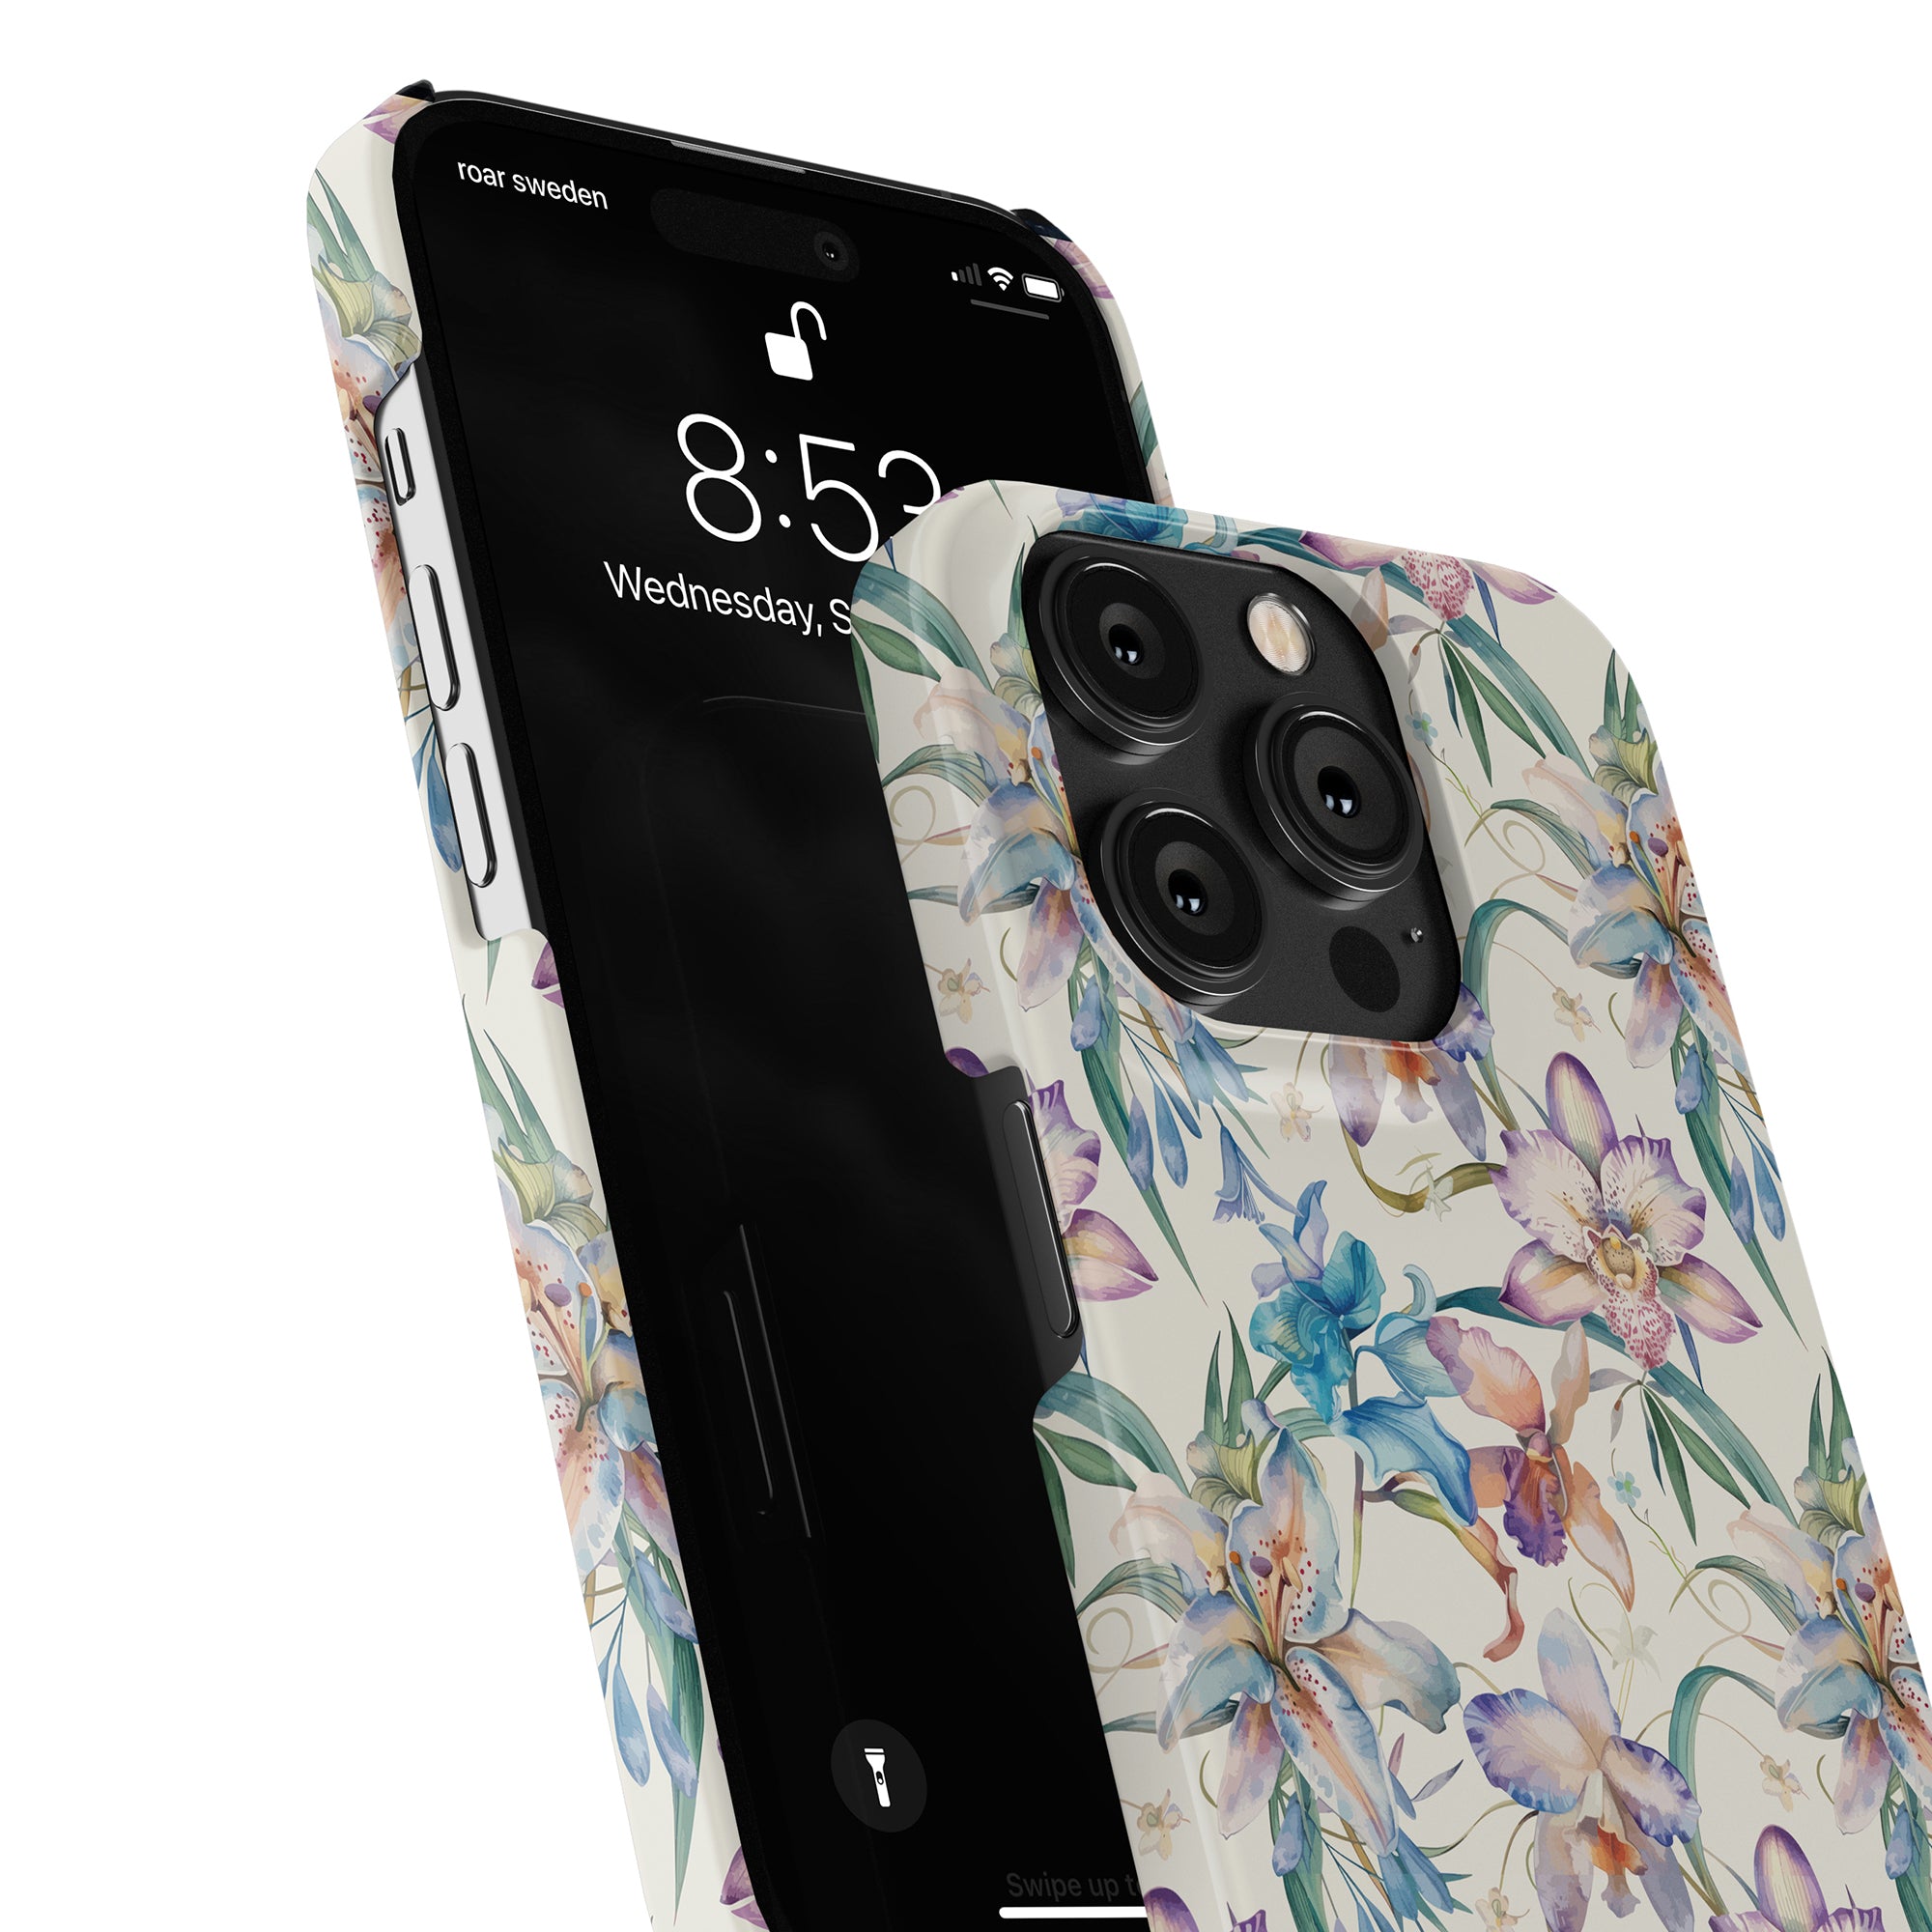 A Bouquet - Slim case featuring a floral pattern adorns the smartphone, which displays the time 8:53 on Wednesday, September 15. Part of the Floral Collection, this stunning case combines elegance with reliable smartphone protection.